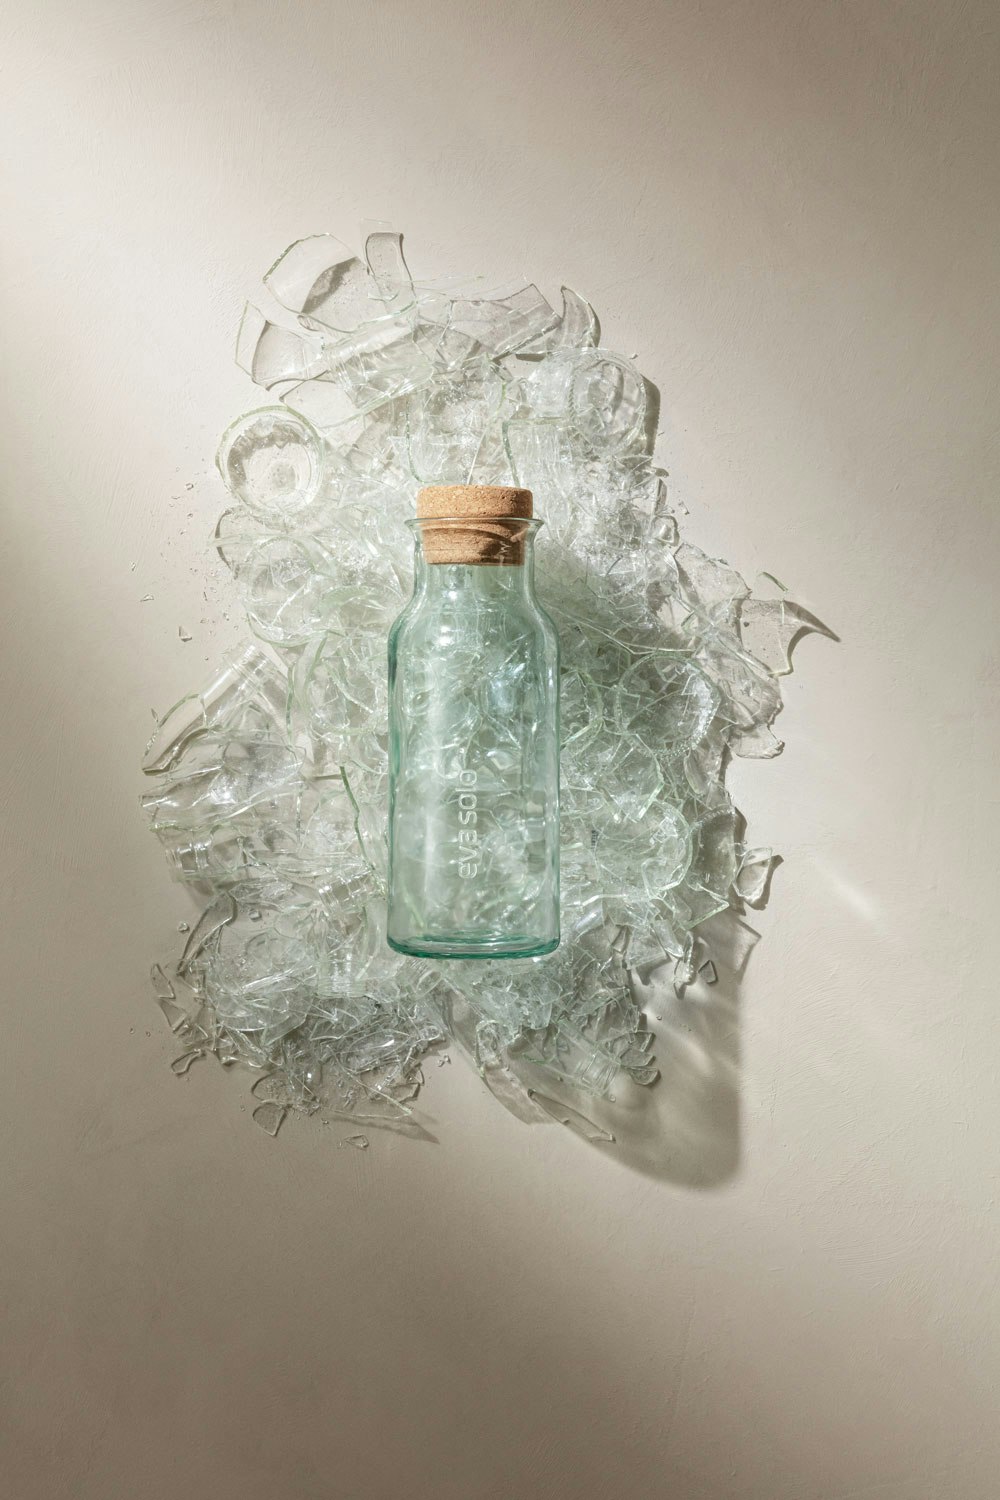 Eva Solo - Recycled glass drinking bottle